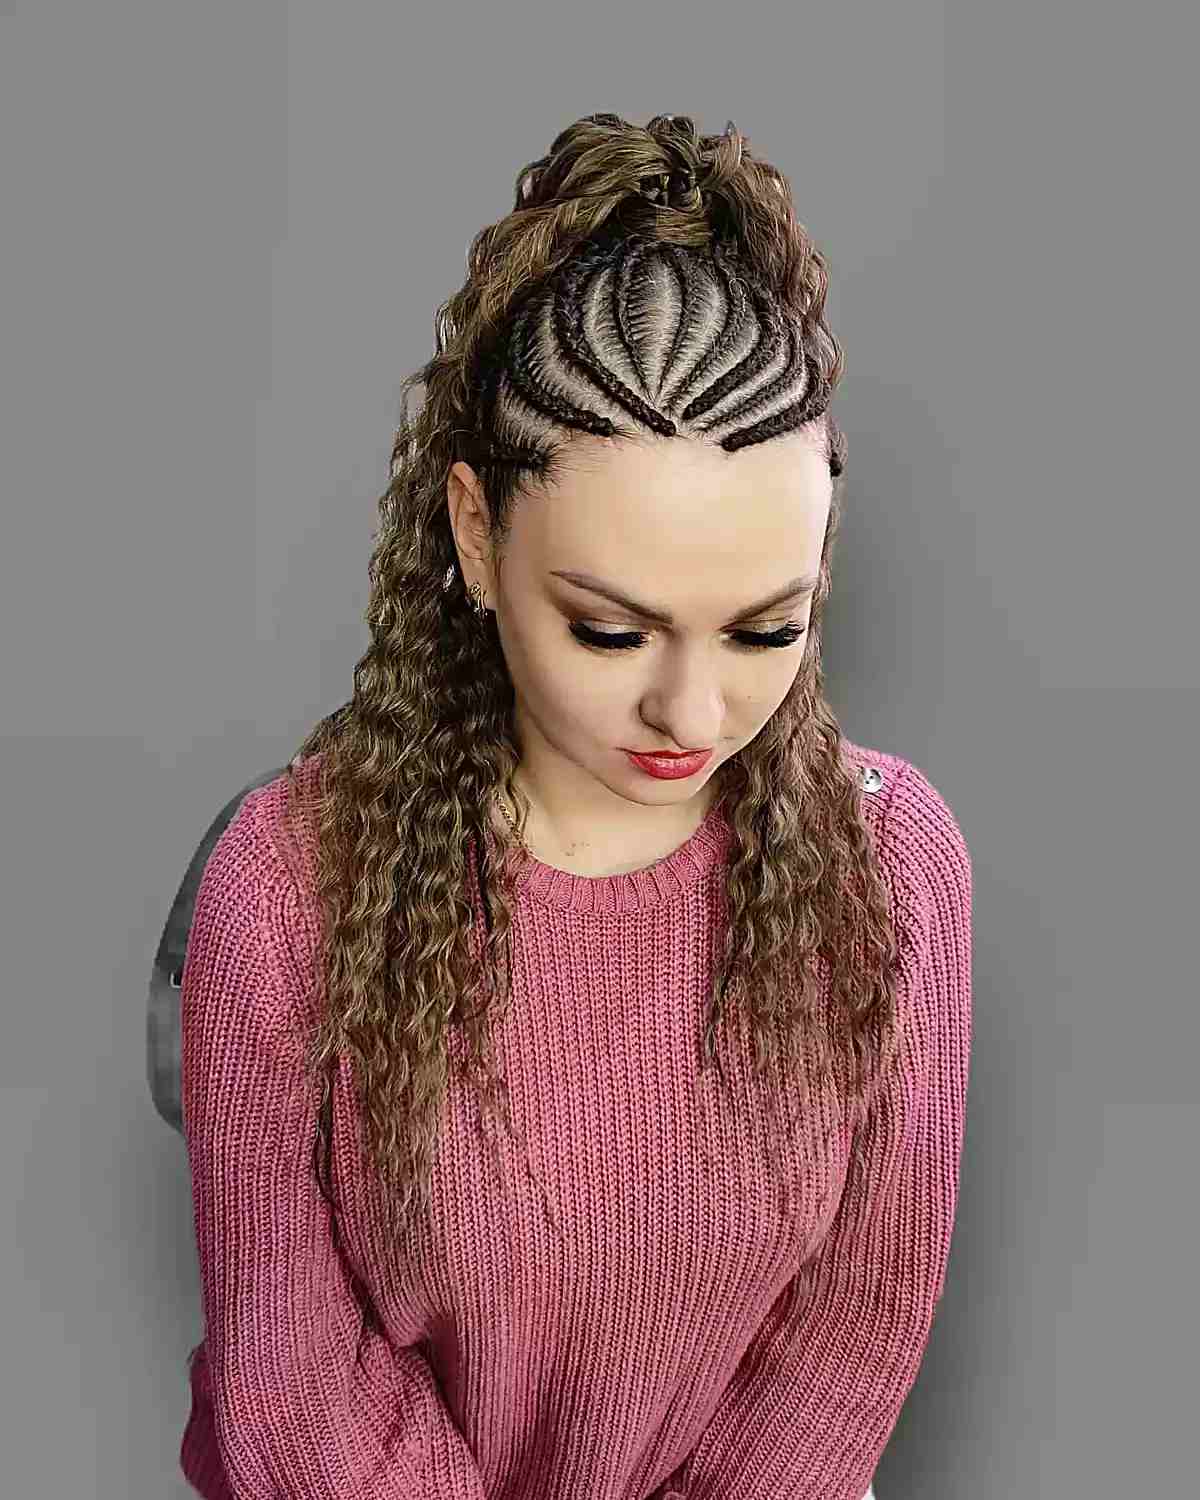 Crochet Braids with Viking Curly High Ponytail for Long Brown Hair